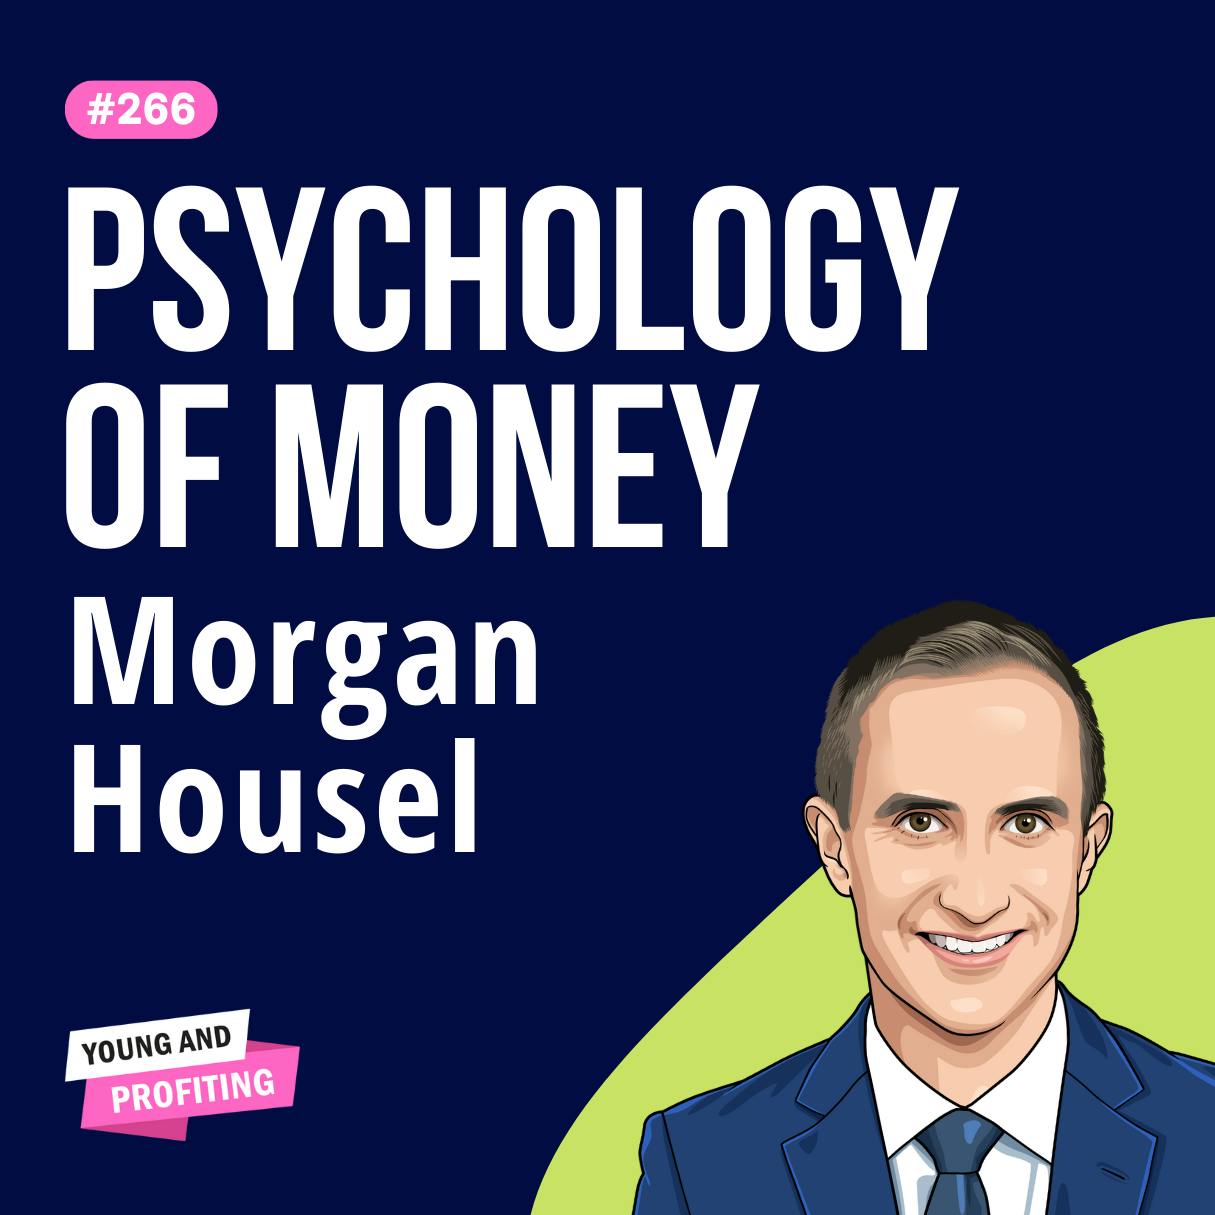 Morgan Housel: How to ACTUALLY Build Wealth, Investing to Gain Financial Independence | E266